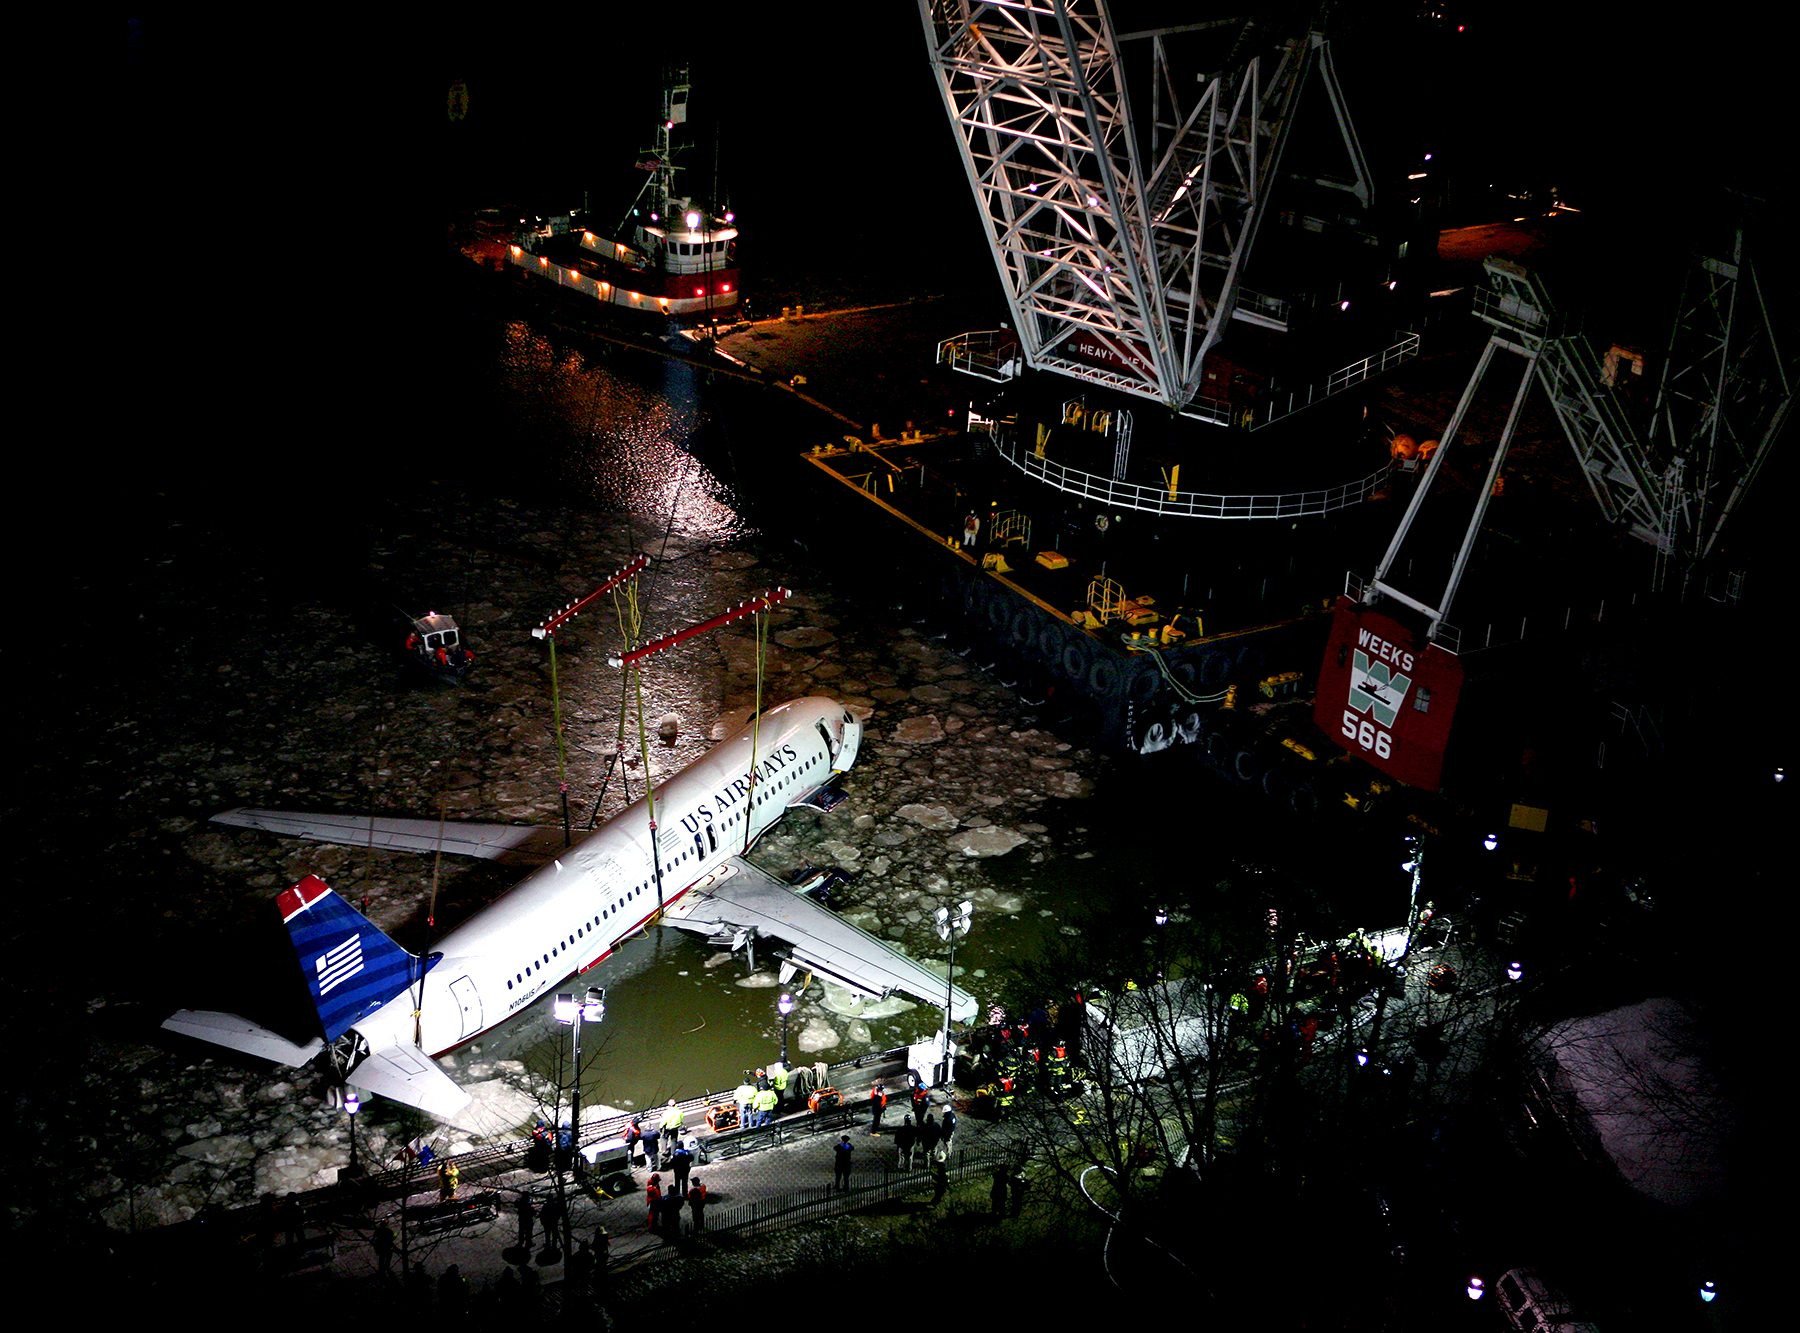  USAir flight 1549, dubbed "Miracle on the Hudson," pulled from icy river, 2009 